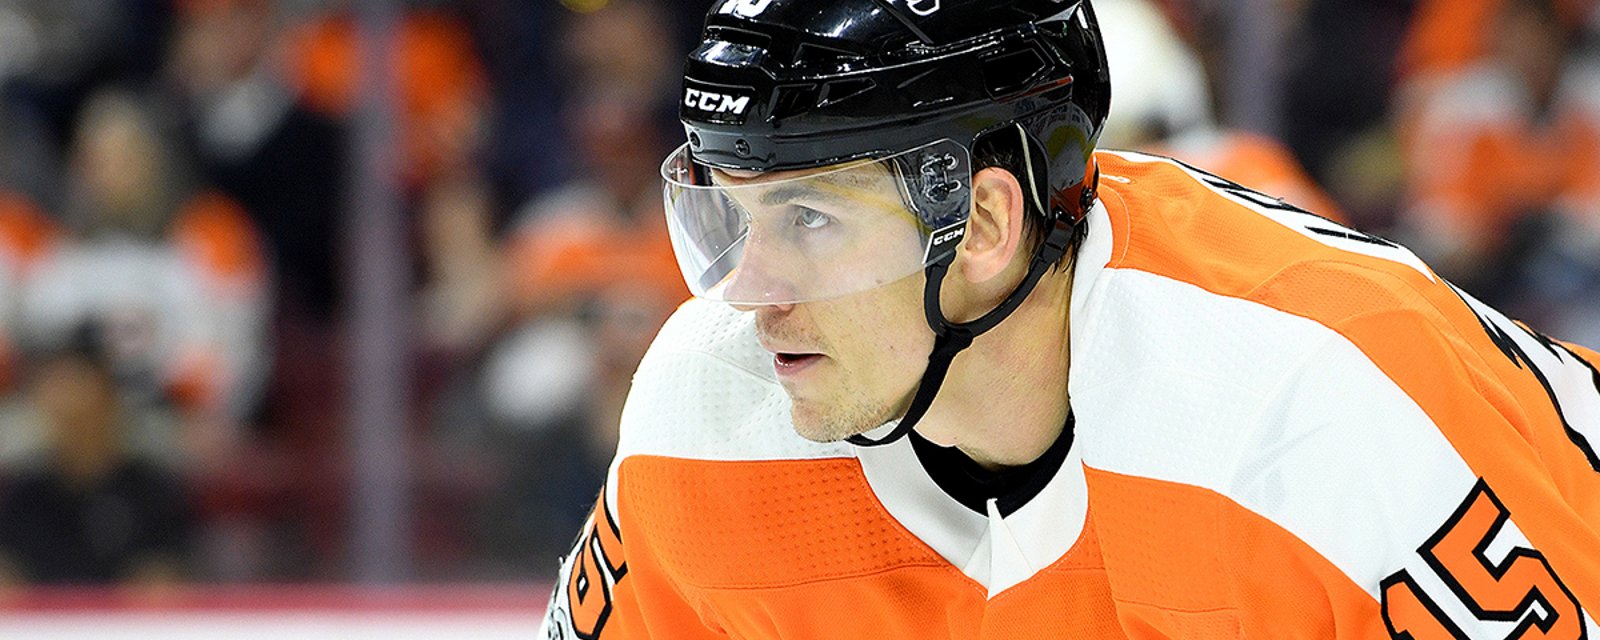 Breaking: Flyers’ Lehtera charged in massive cocaine bust!